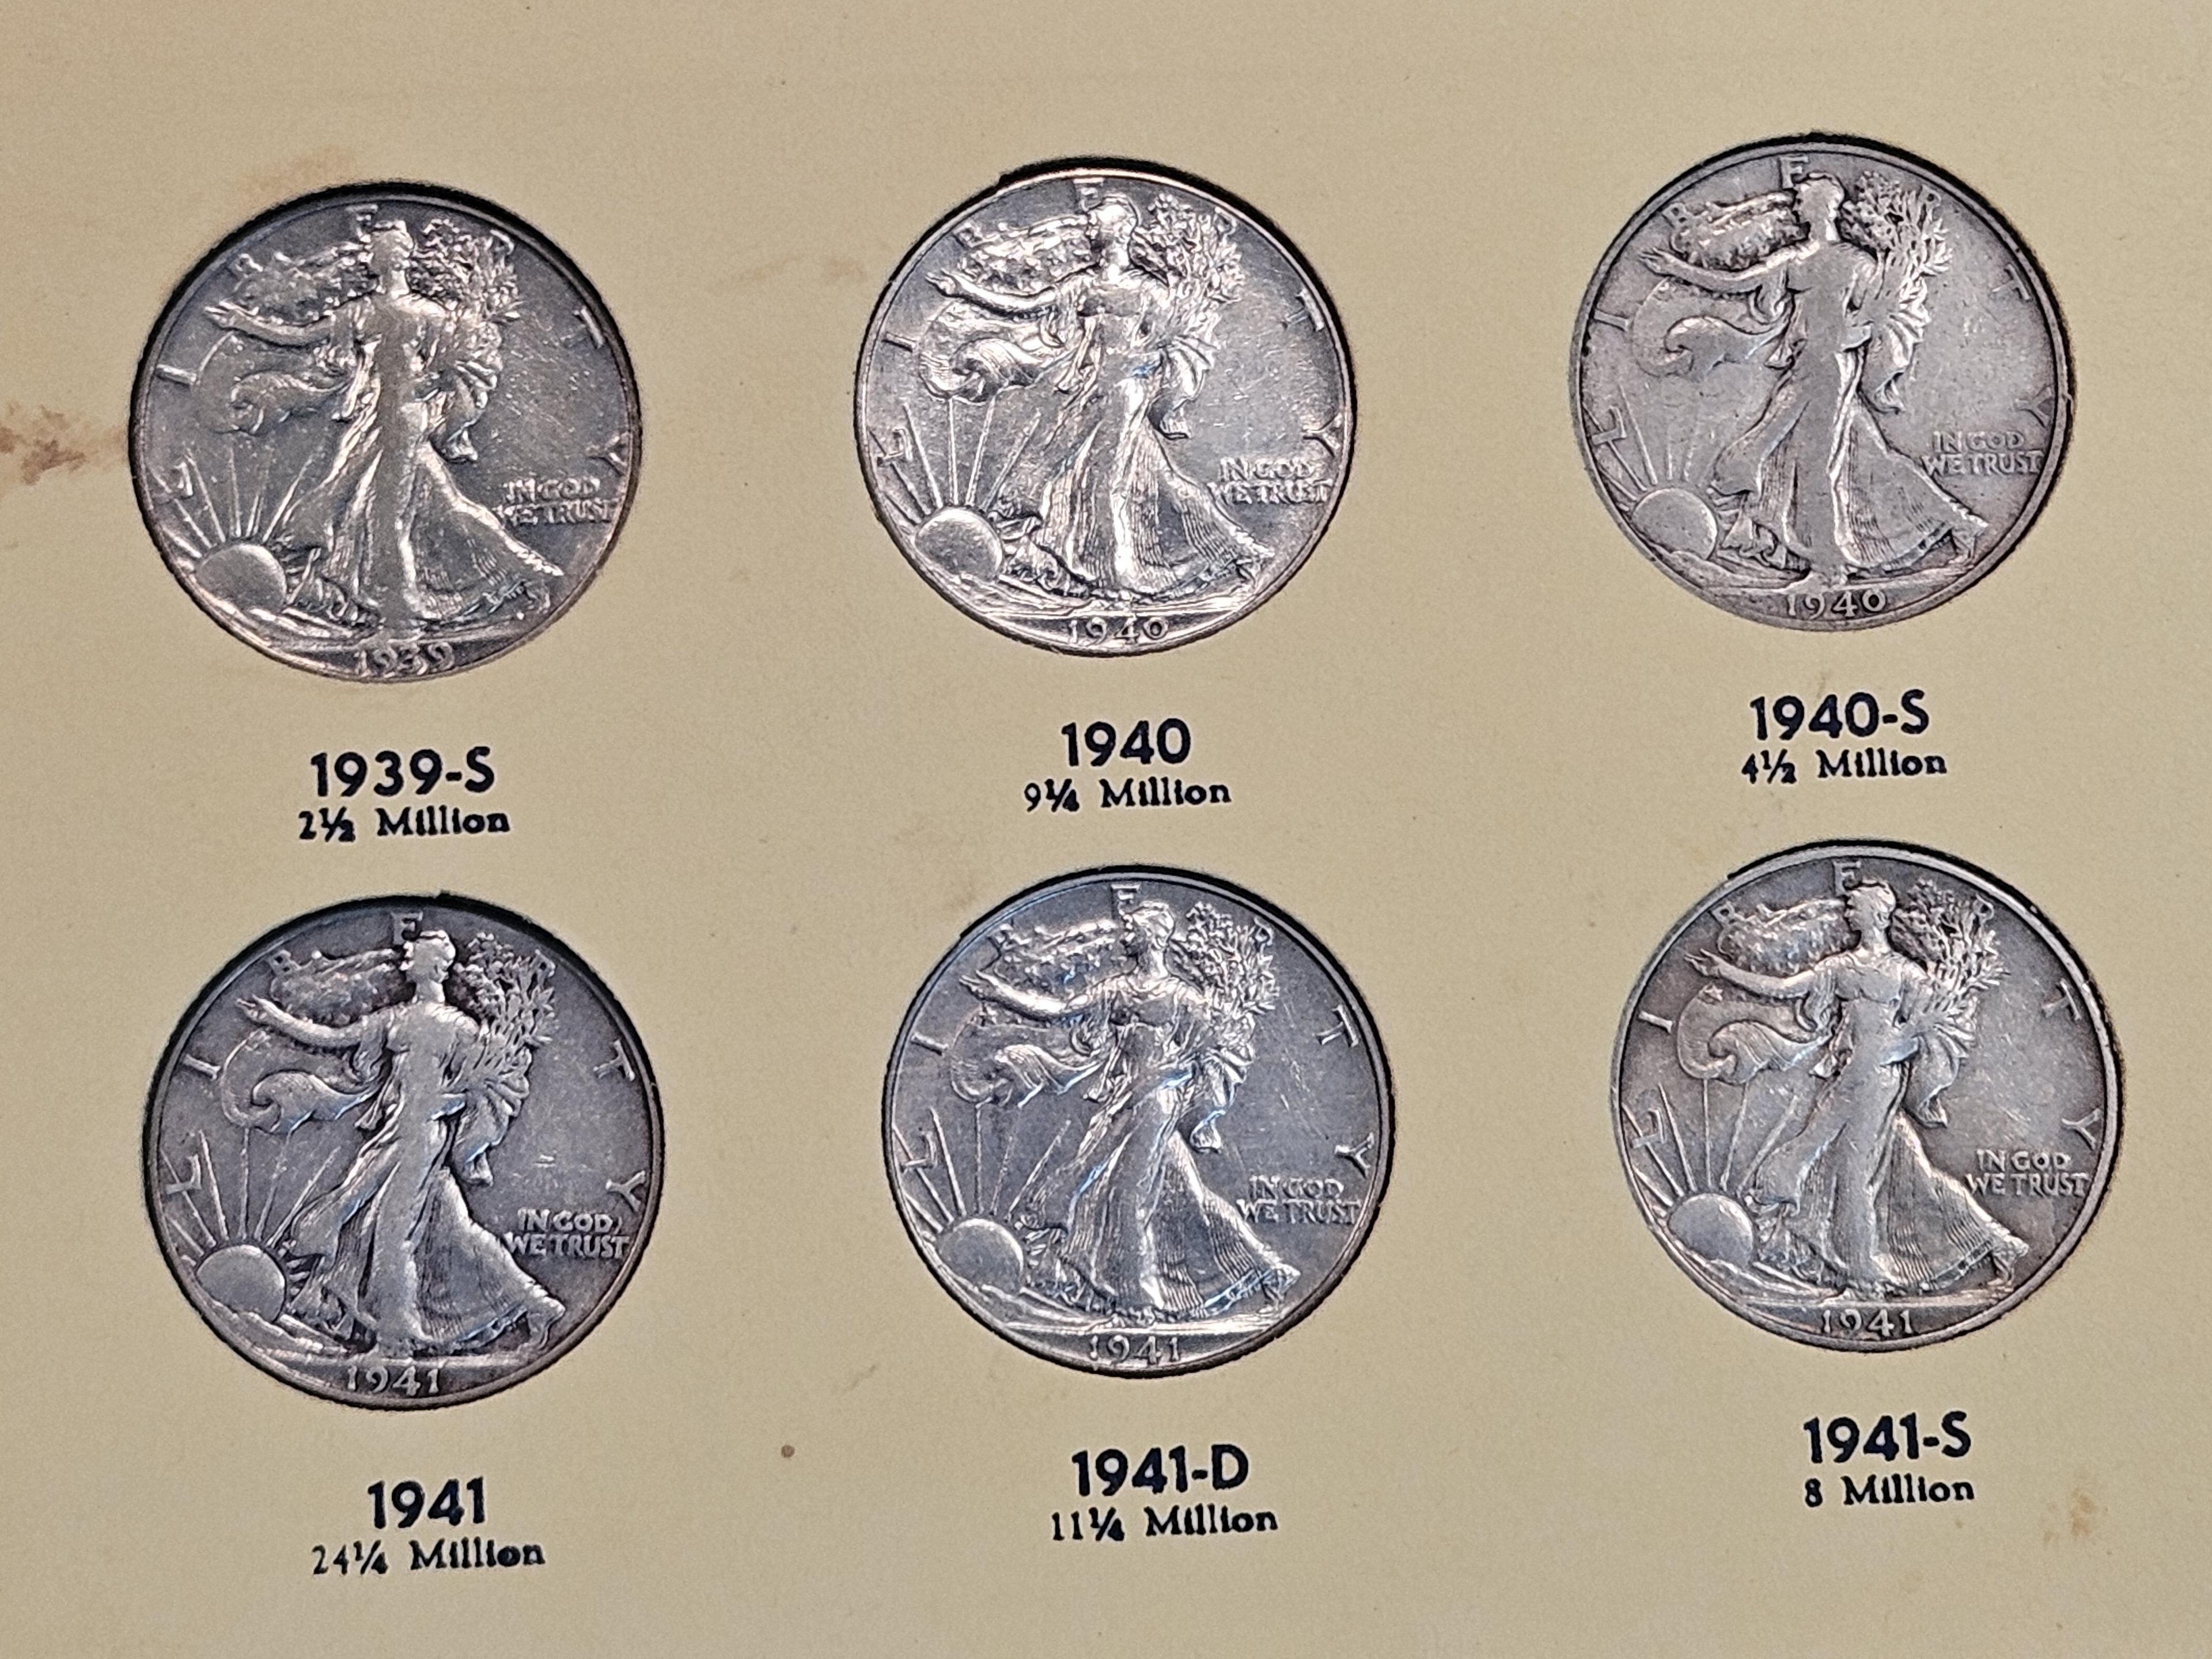 COMPLETE! 1937 - 1947 Walking Liberty silver Half Dollar Collection